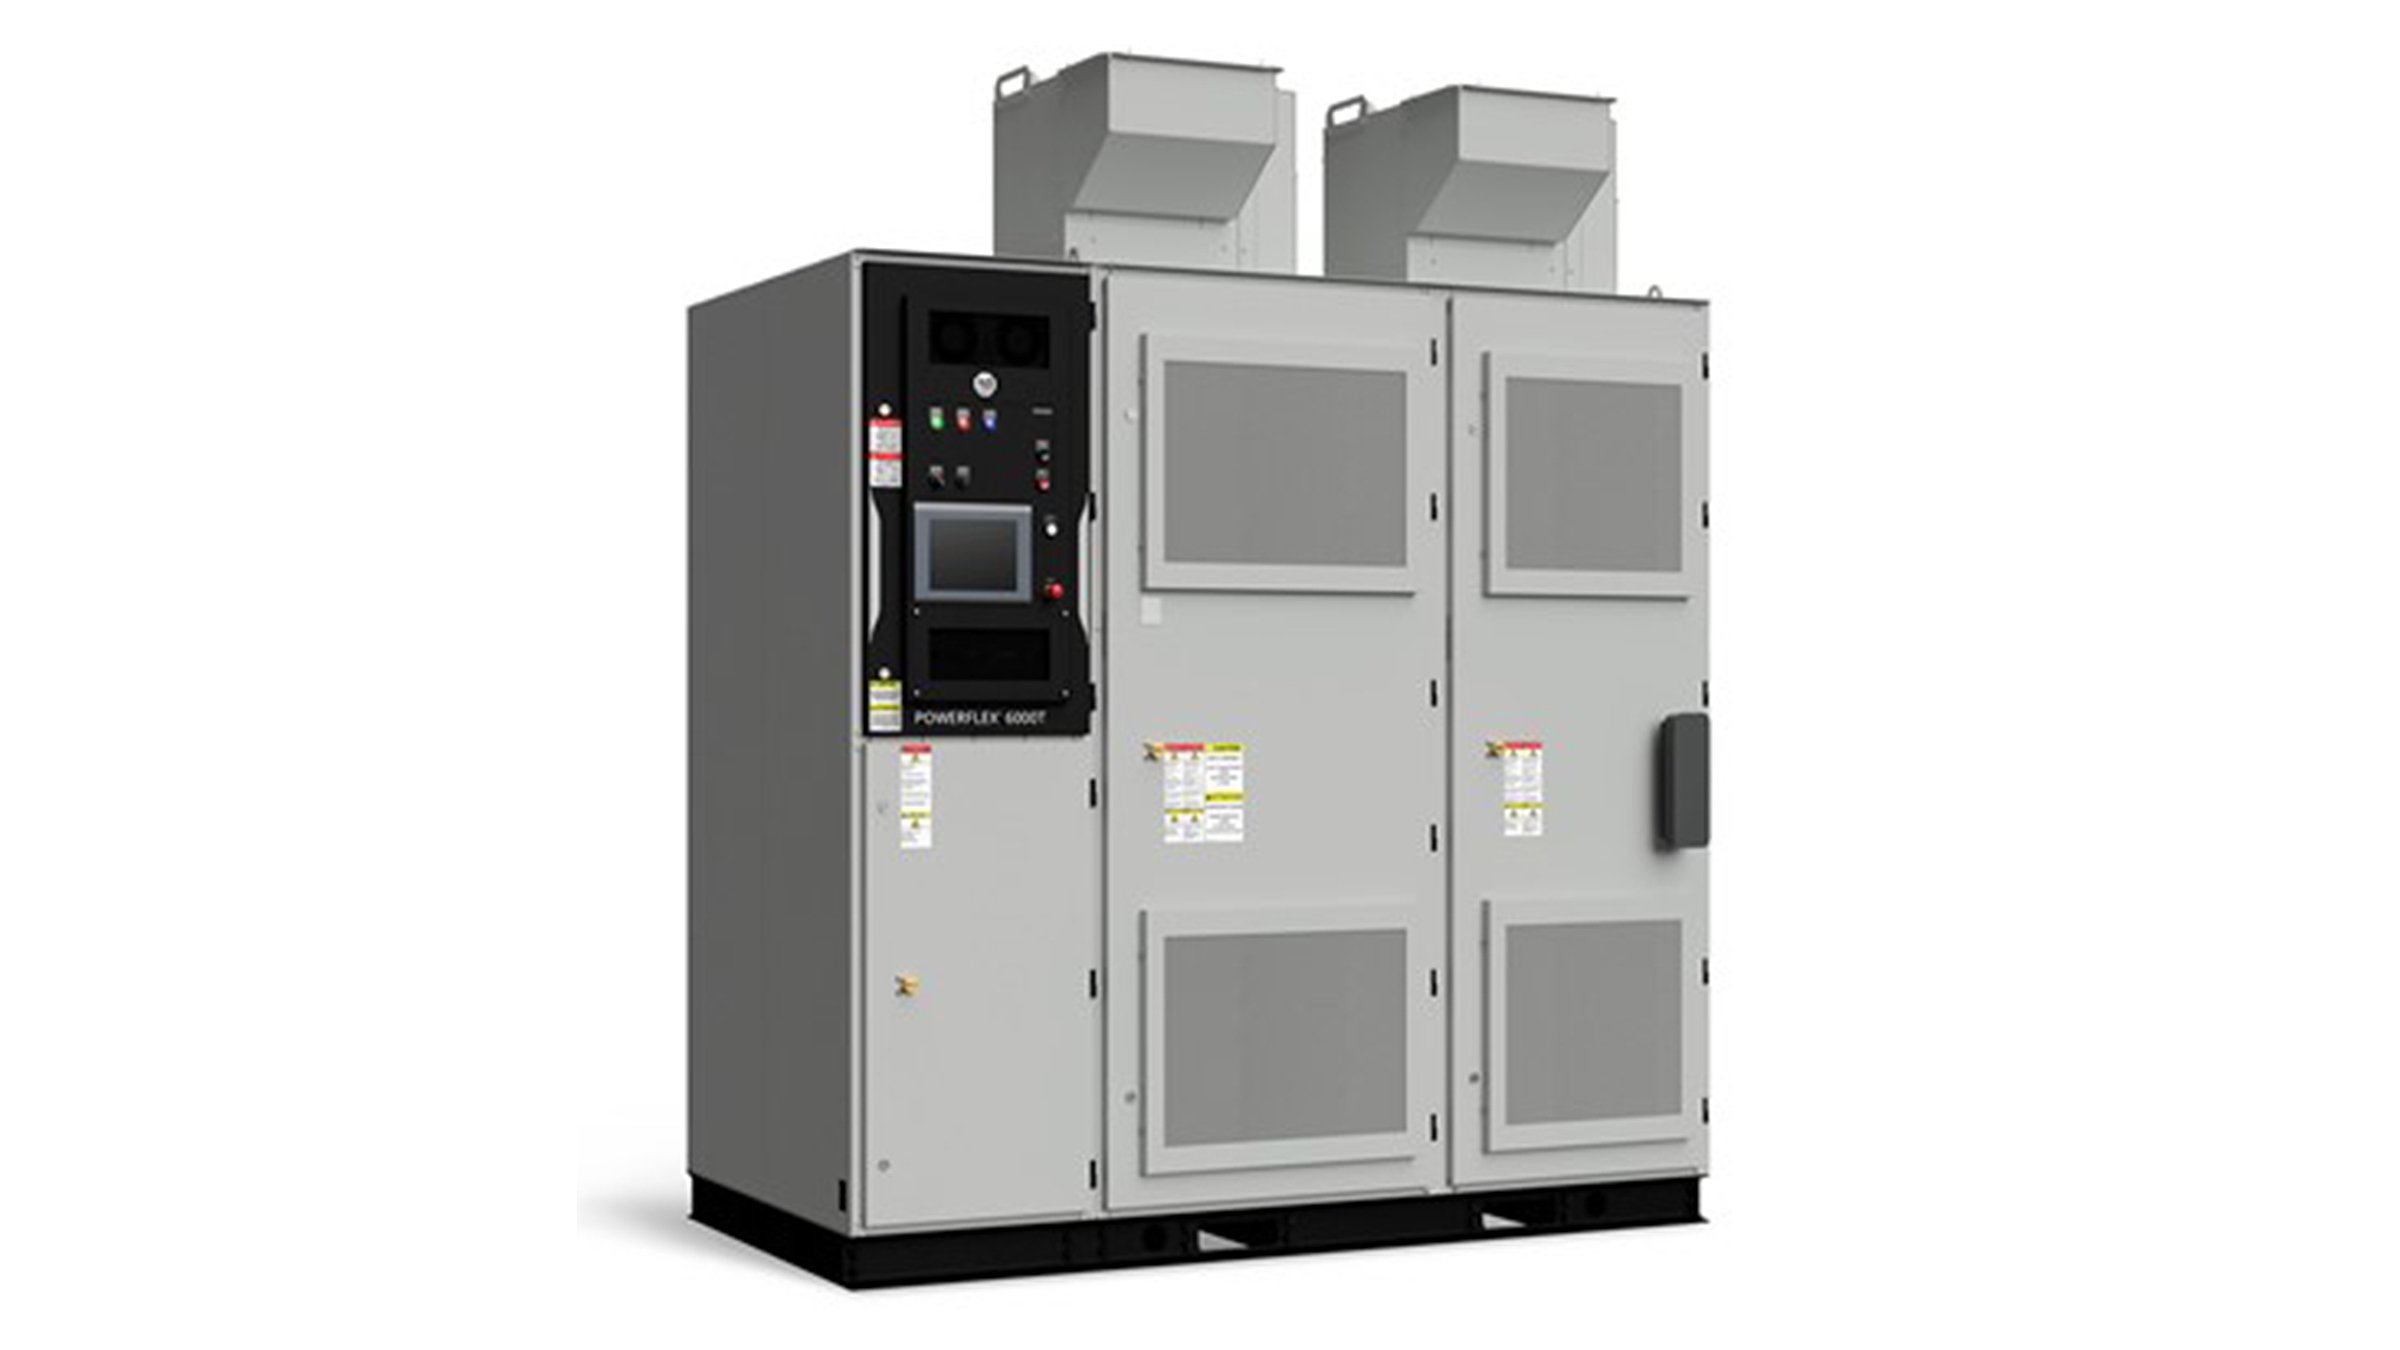 Three tall, gray side-by-side metal cabinets comprise the PowerFlex 6000T drive unit from Rockwell Automation – used to control motors in heavy industrial applications.